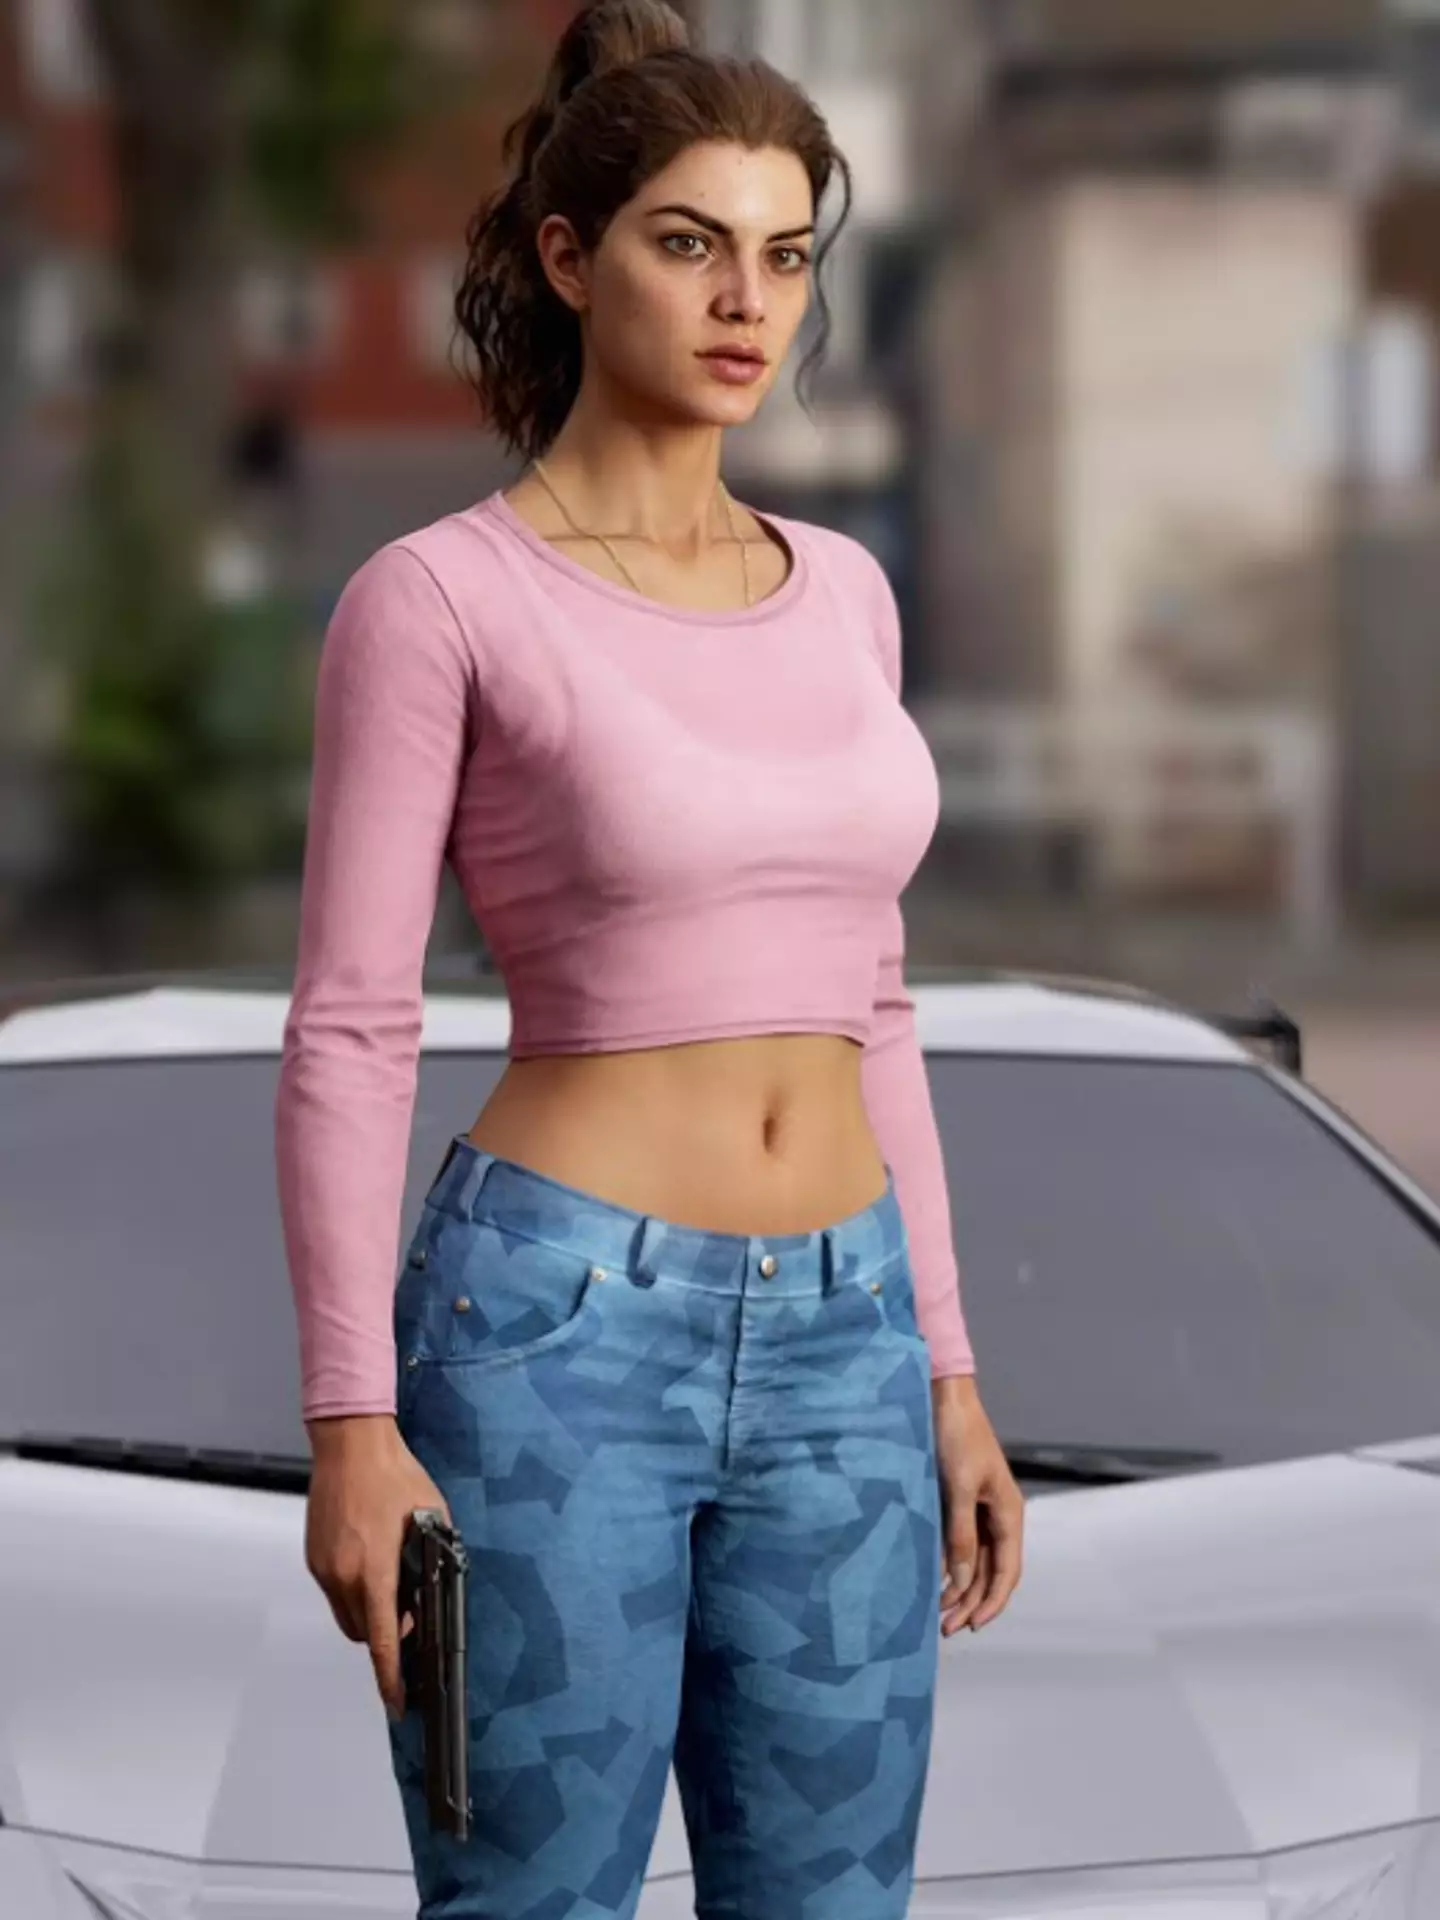 GTA's first-ever female protagonist Lucia as imagined by an artist based on the leaked gameplay footage.